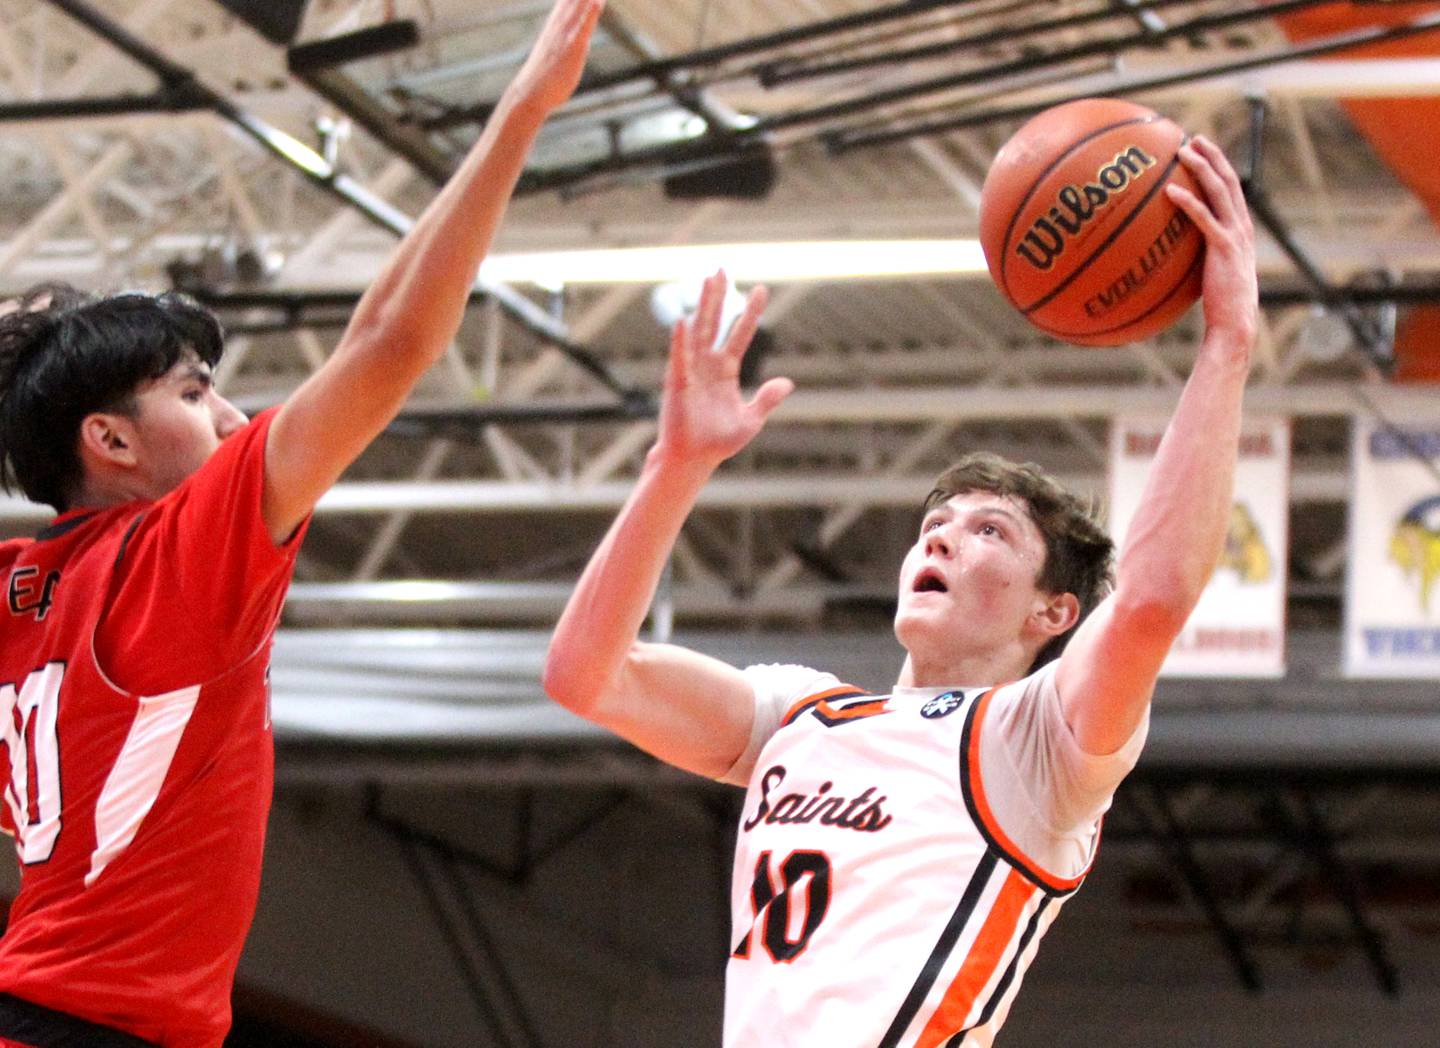 St. Charles East’s Steven Call (10) puts the ball up during a game against East Aurora in the 63rd Annual Ron Johnson Thanksgiving Tournament at St. Charles East on Monday, Nov. 21, 2022.